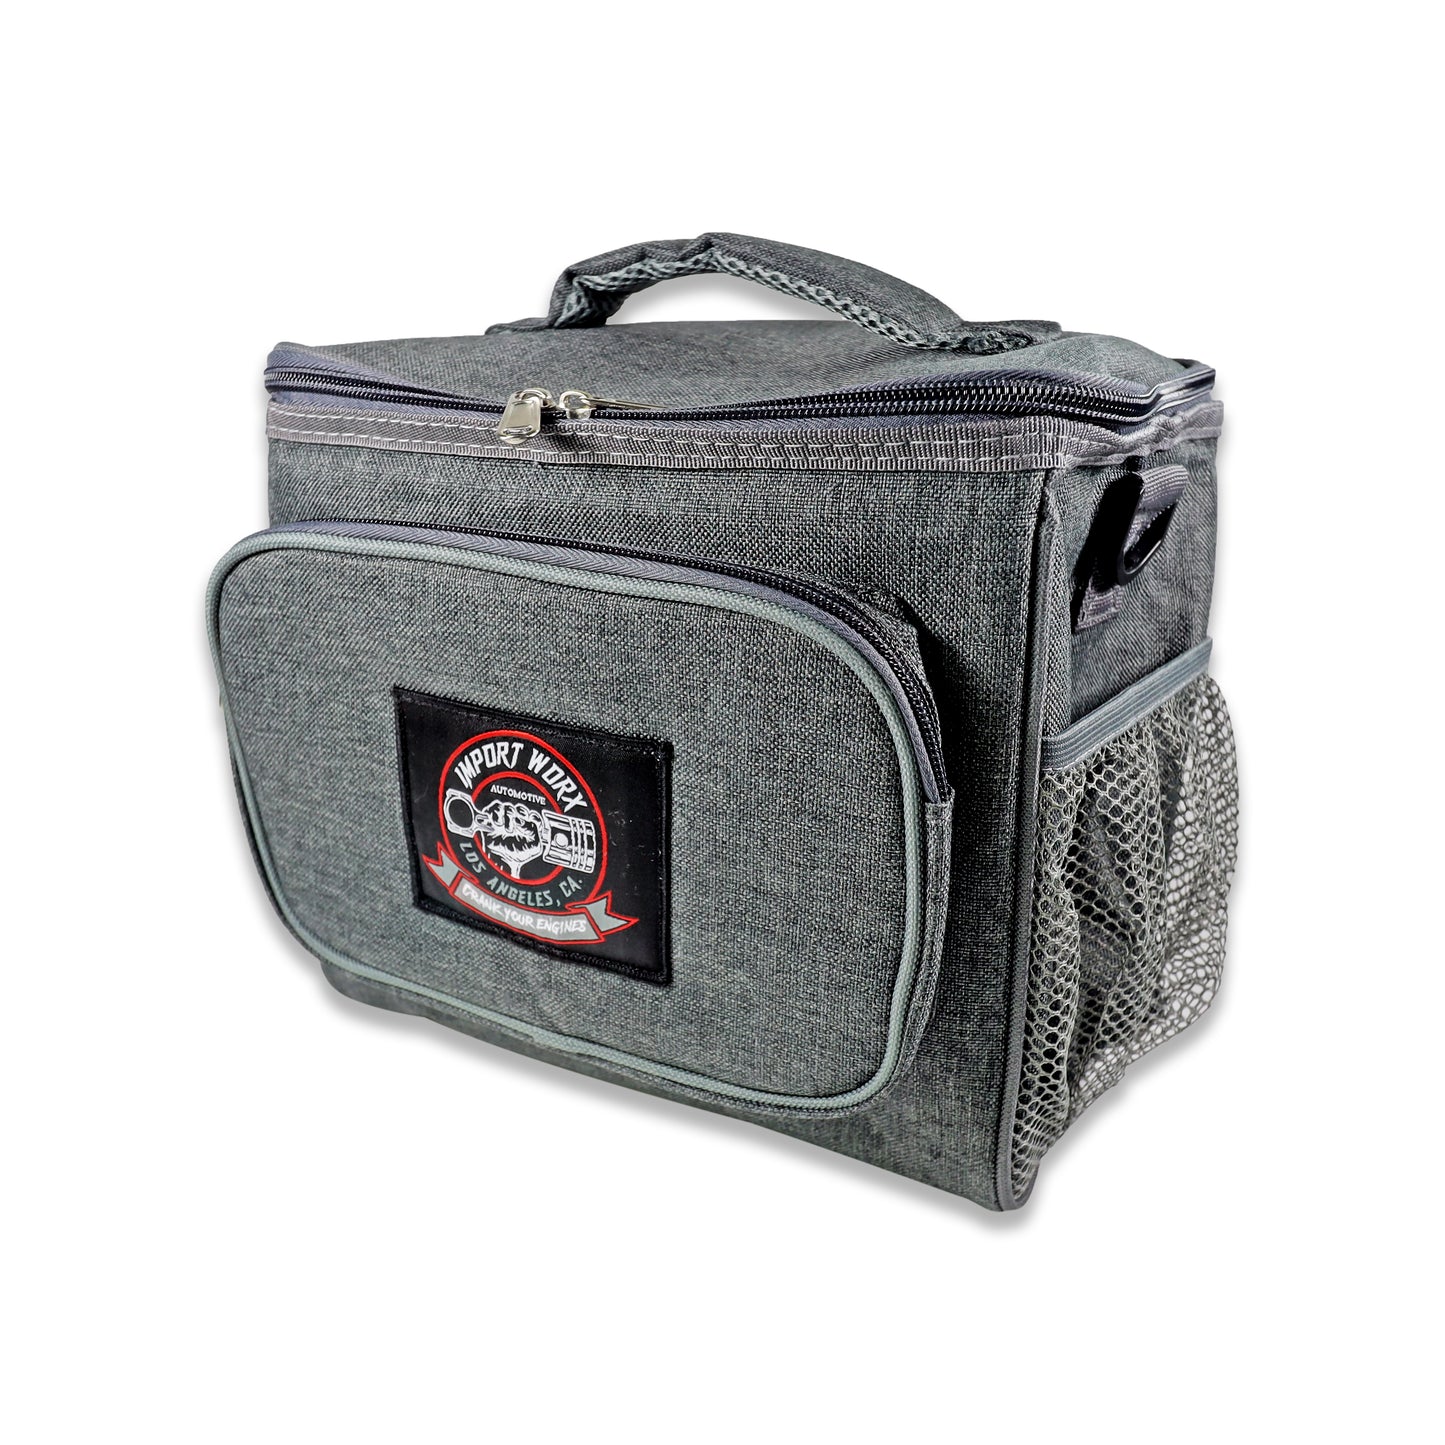 ImportWorx Gray Piston Insulated Lunch Box Thermal Container